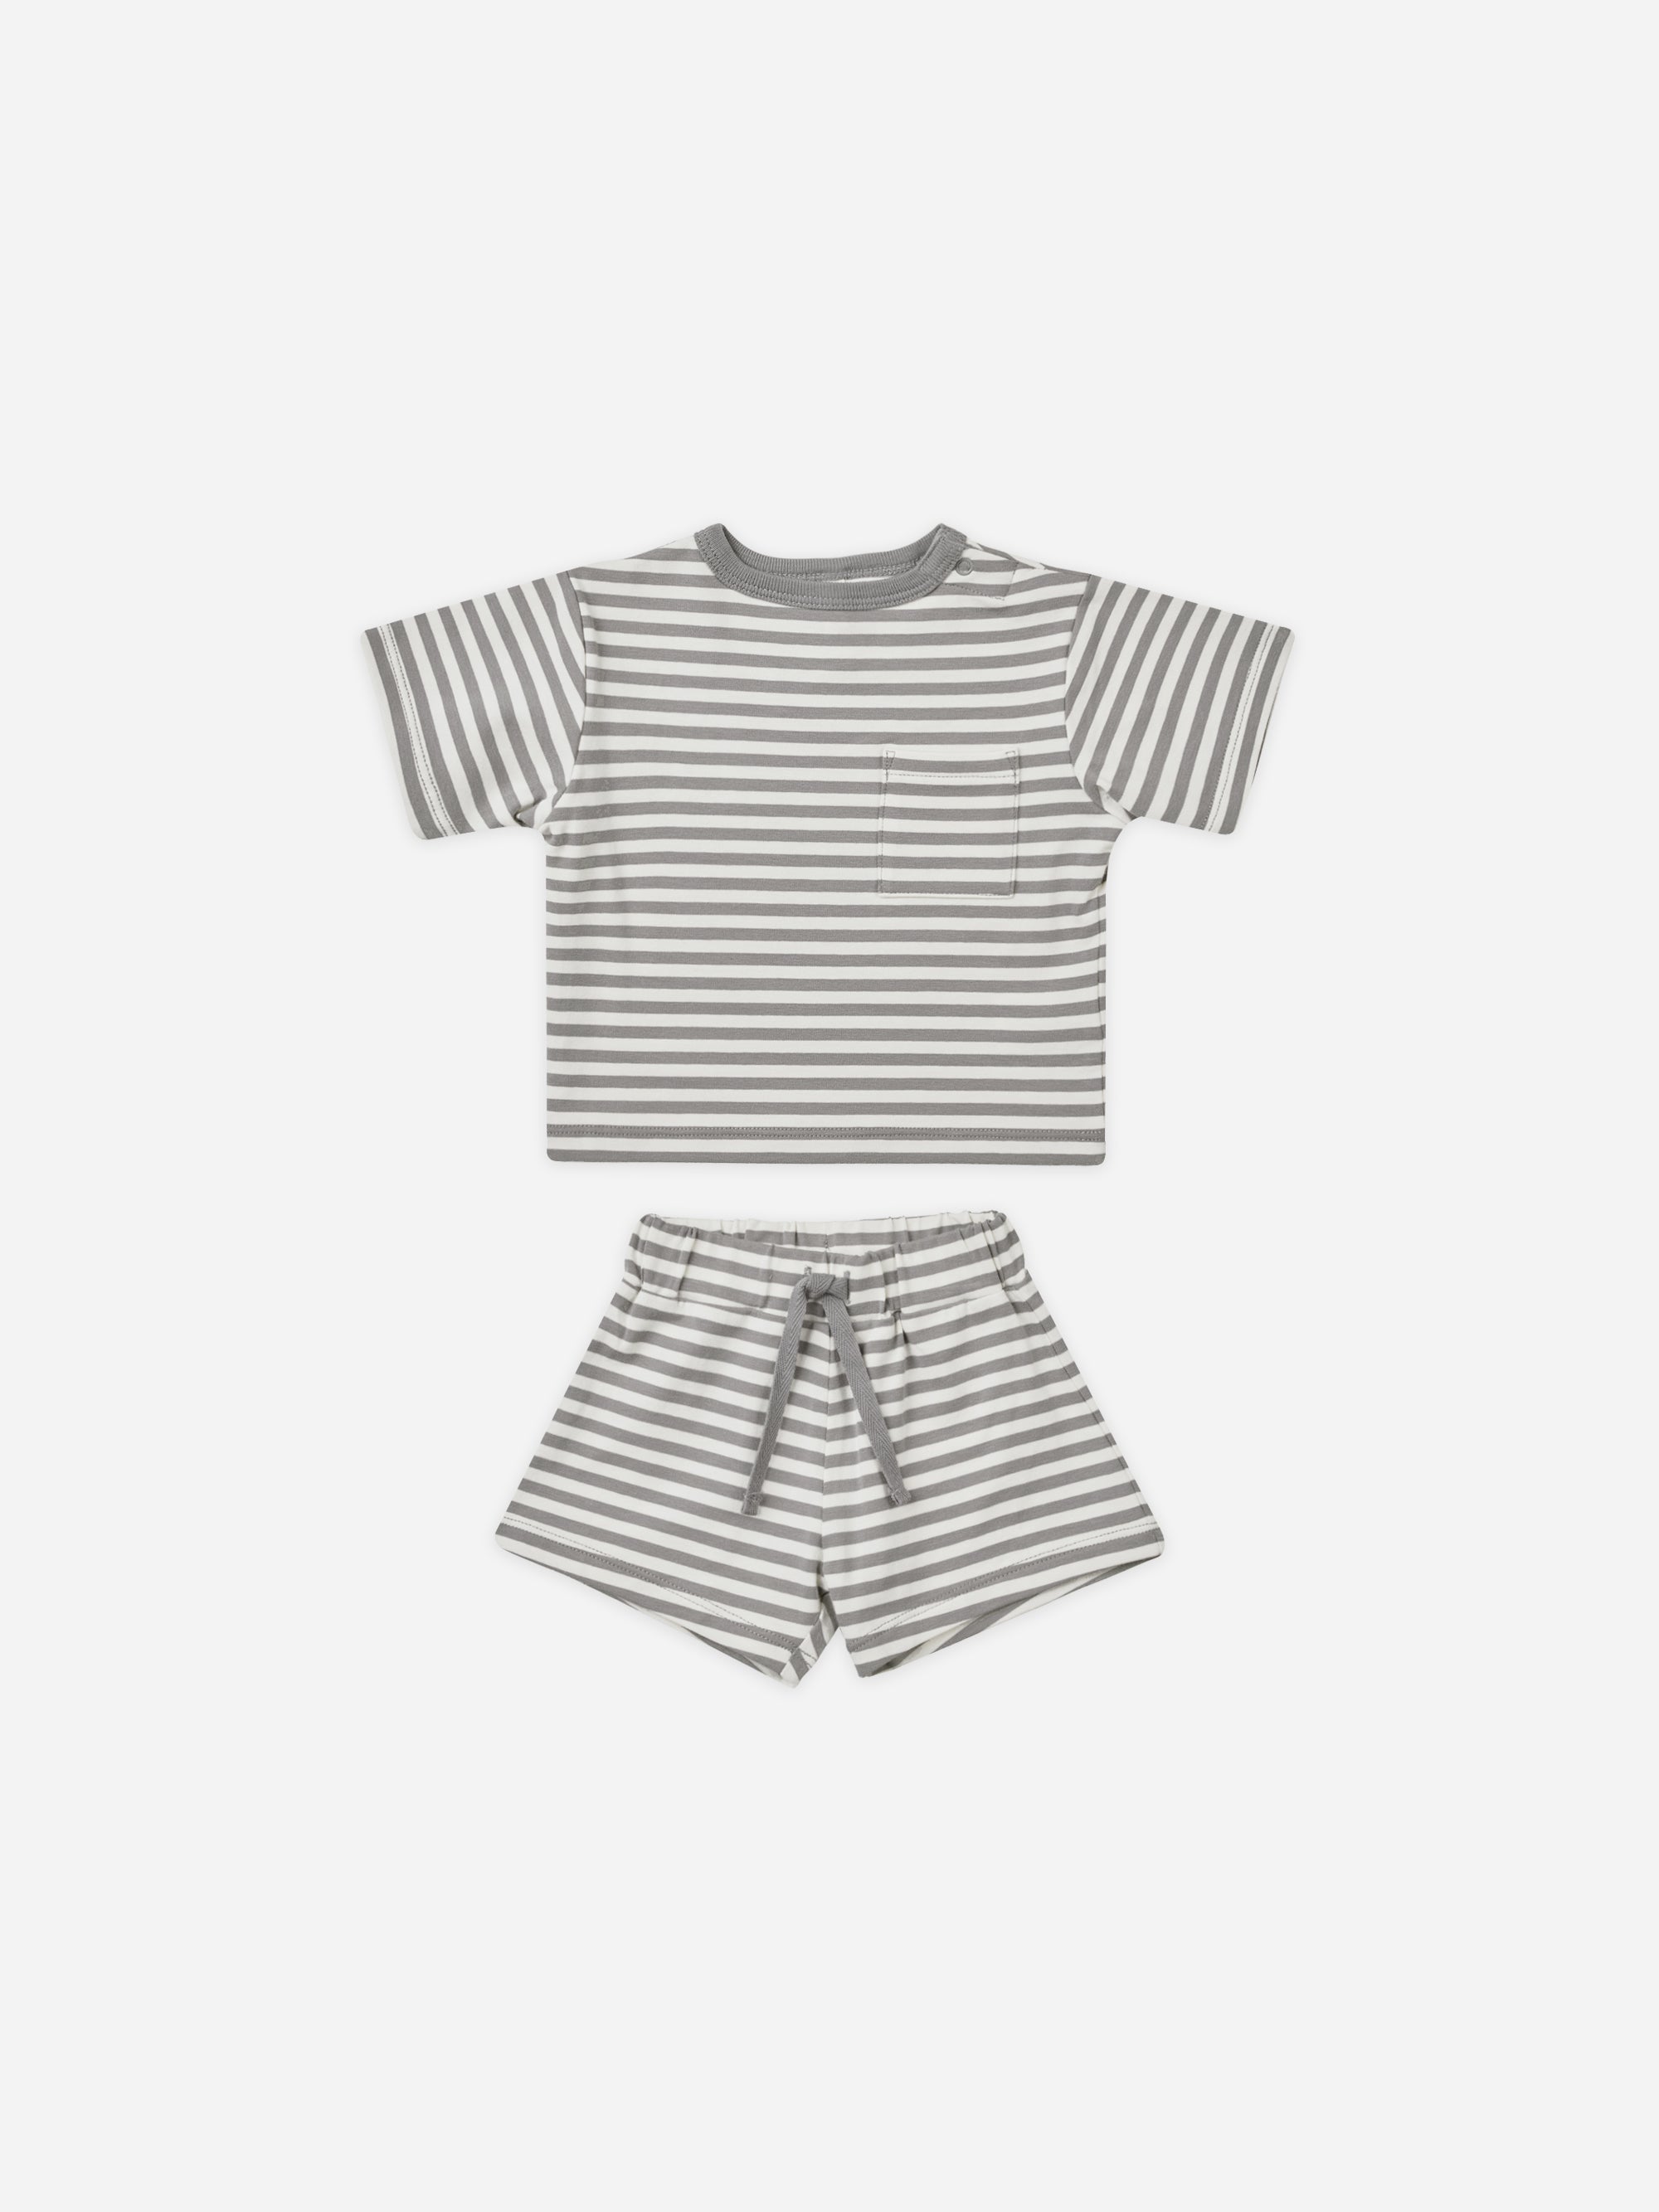 Boxy Pocket Tee + Short Set || Lagoon Stripe - Rylee + Cru | Kids Clothes | Trendy Baby Clothes | Modern Infant Outfits |